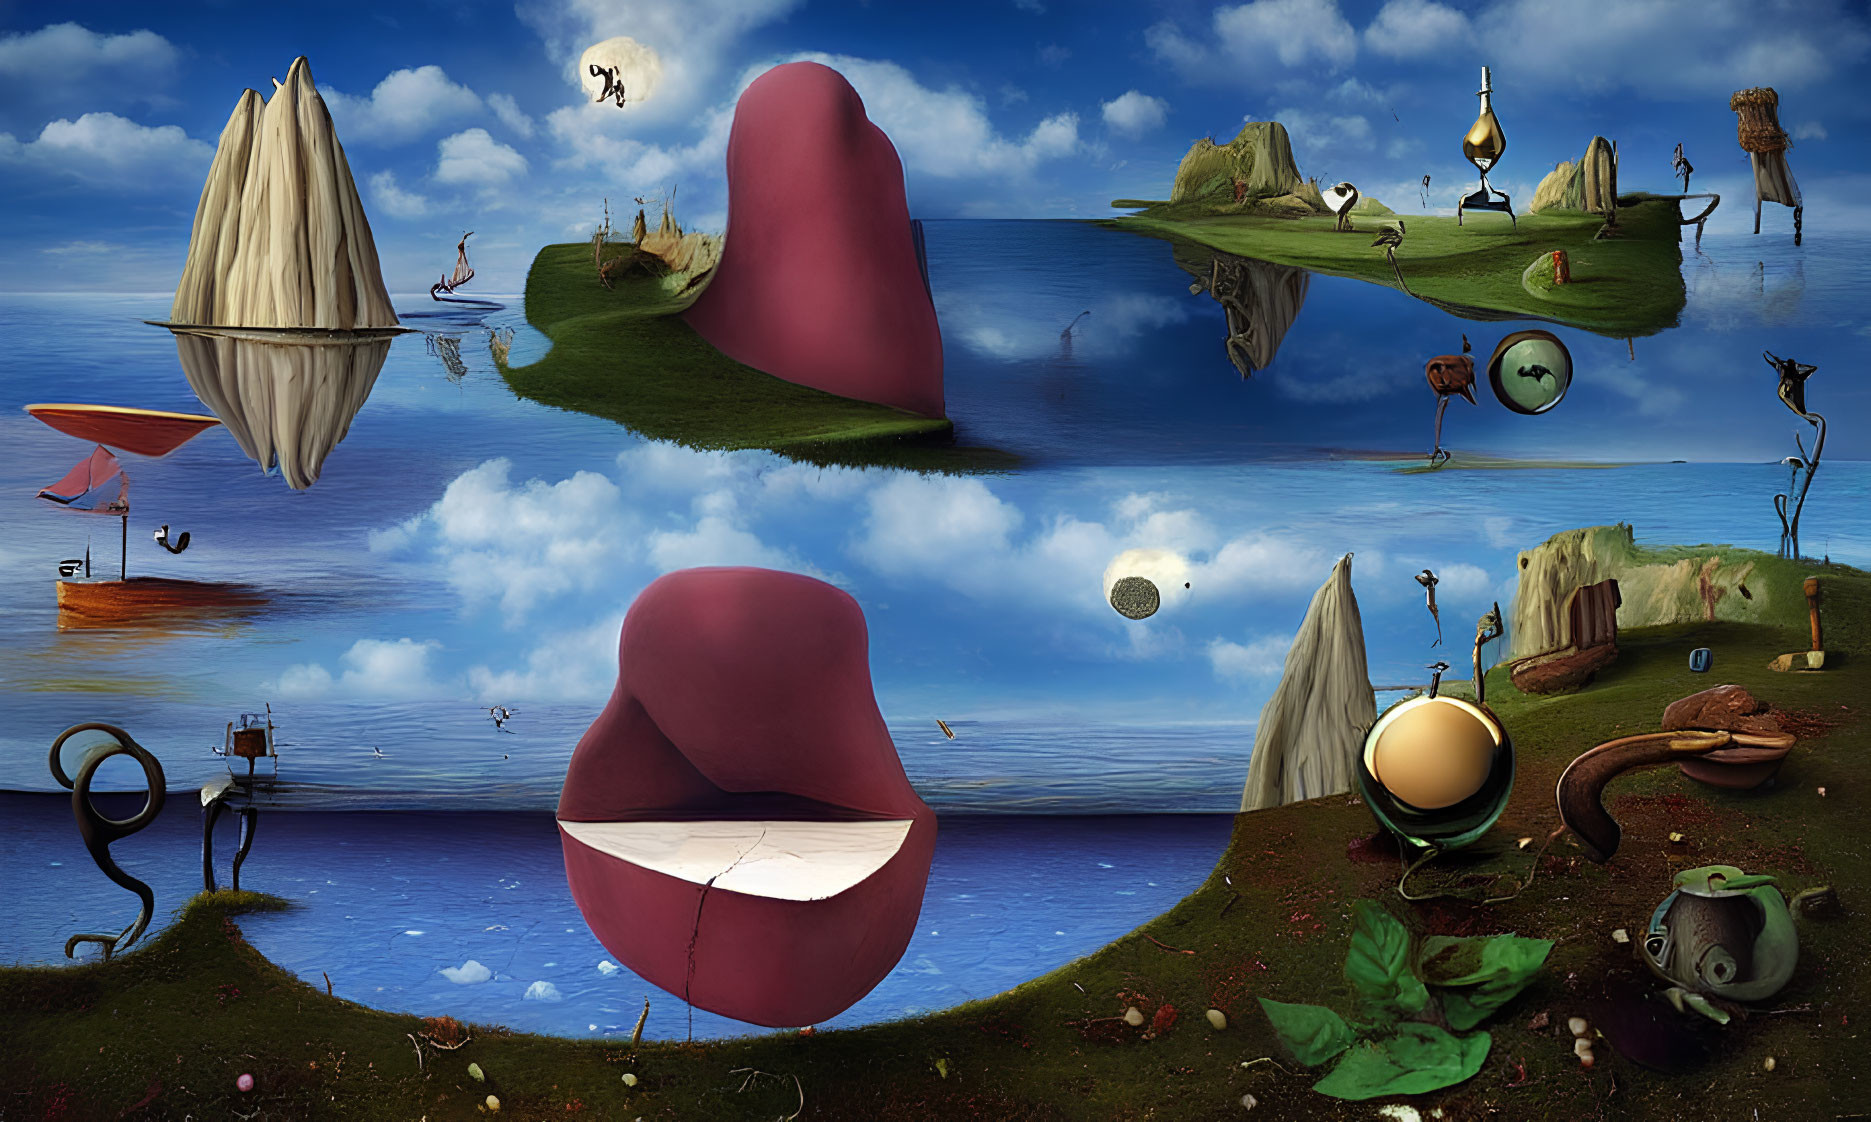 Surreal landscape with floating islands and whimsical objects